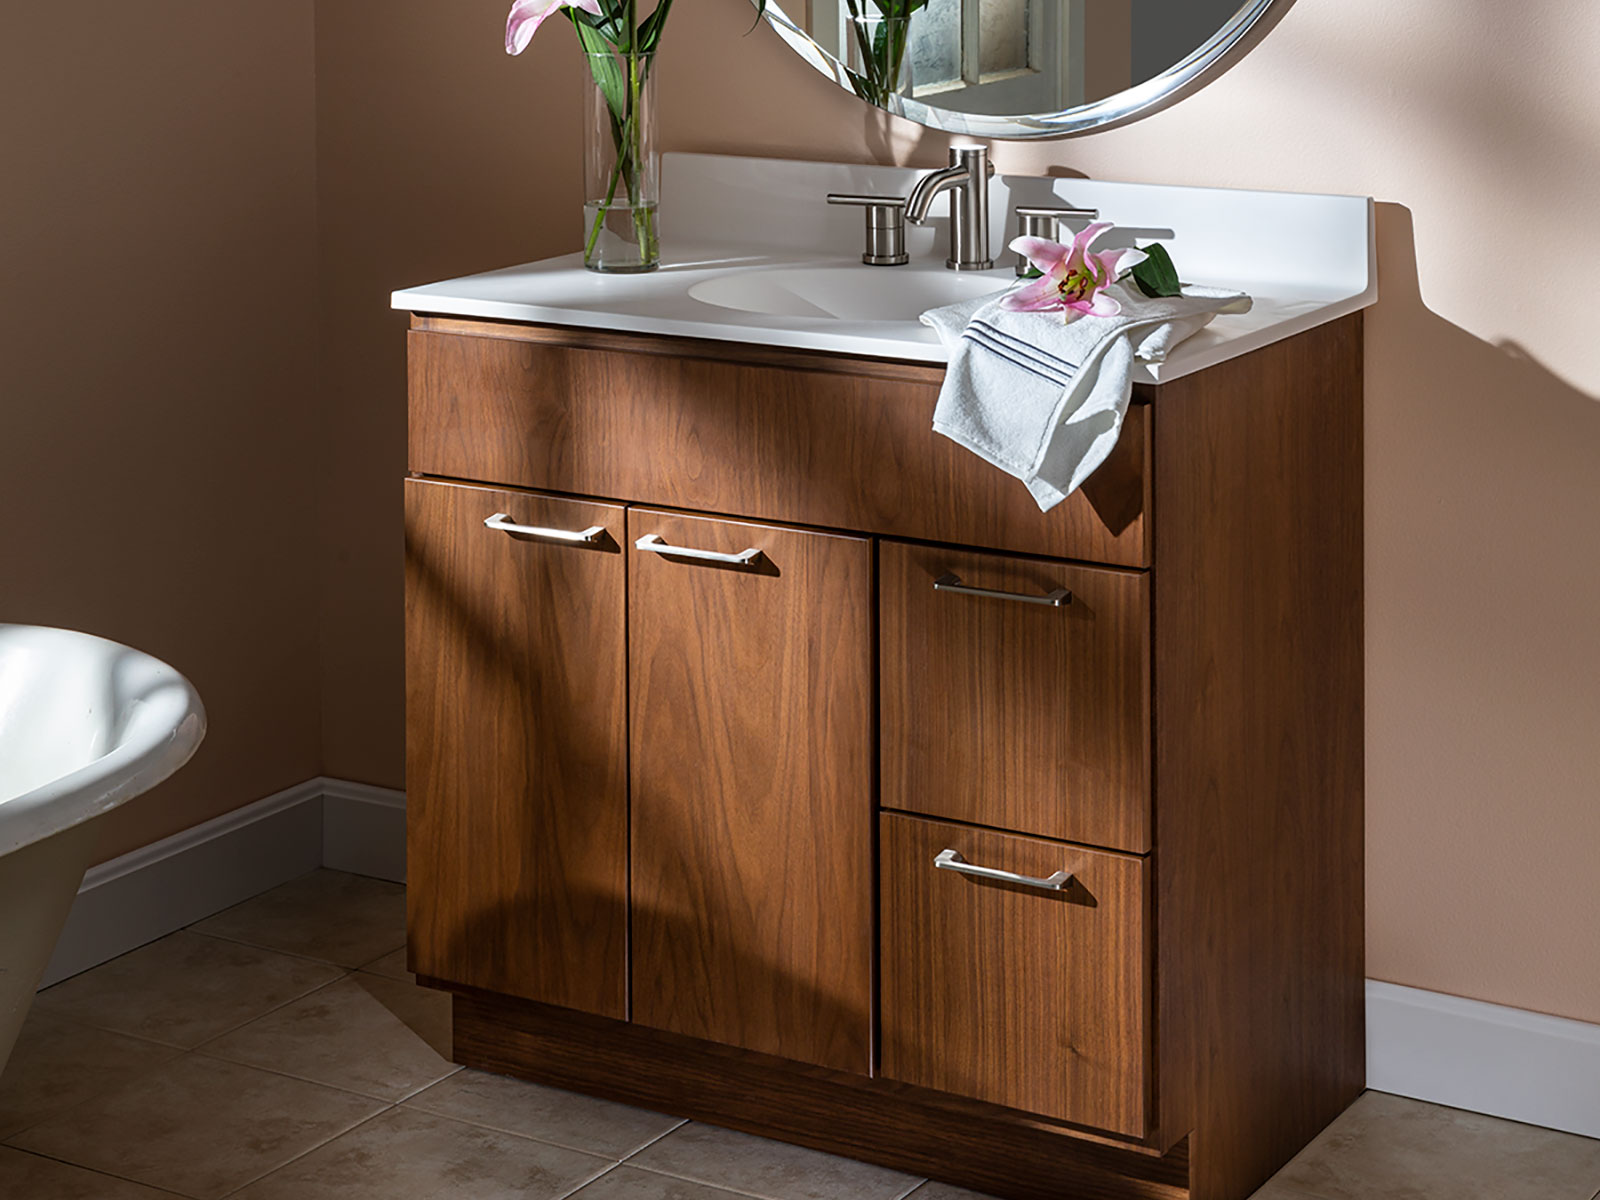 Bath Vanities And Cabinetry, Wood Vanity Cabinets For Bathrooms